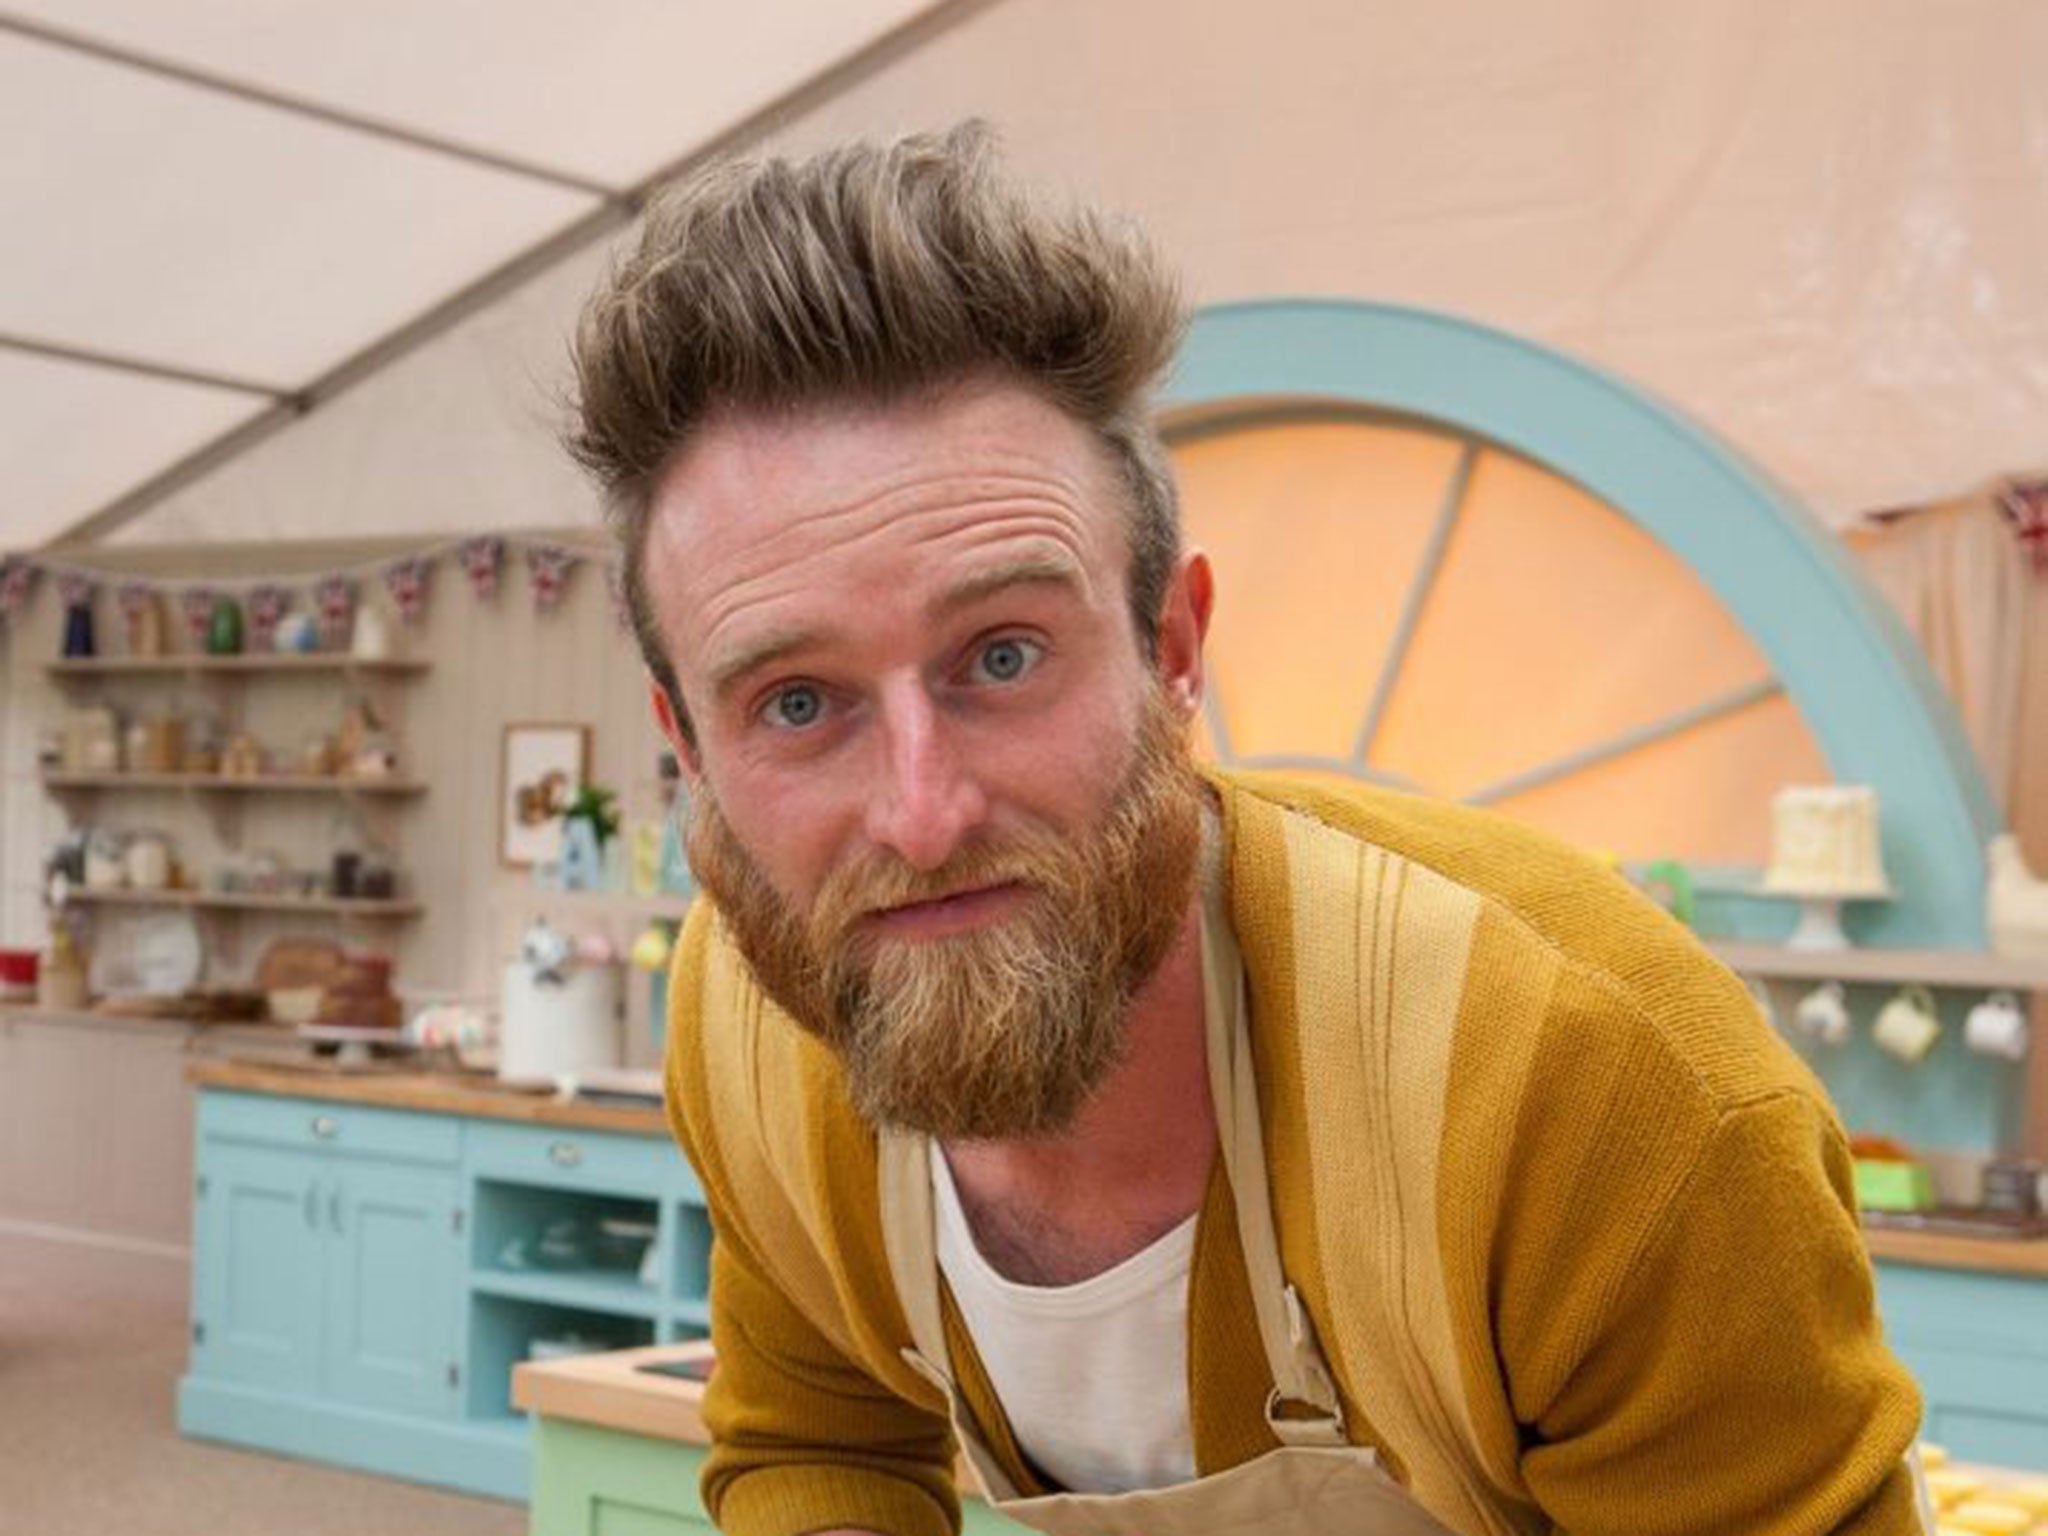 Iain Watters and his Baked Alaska is easily the stand-out moment from The Great British Bake Off